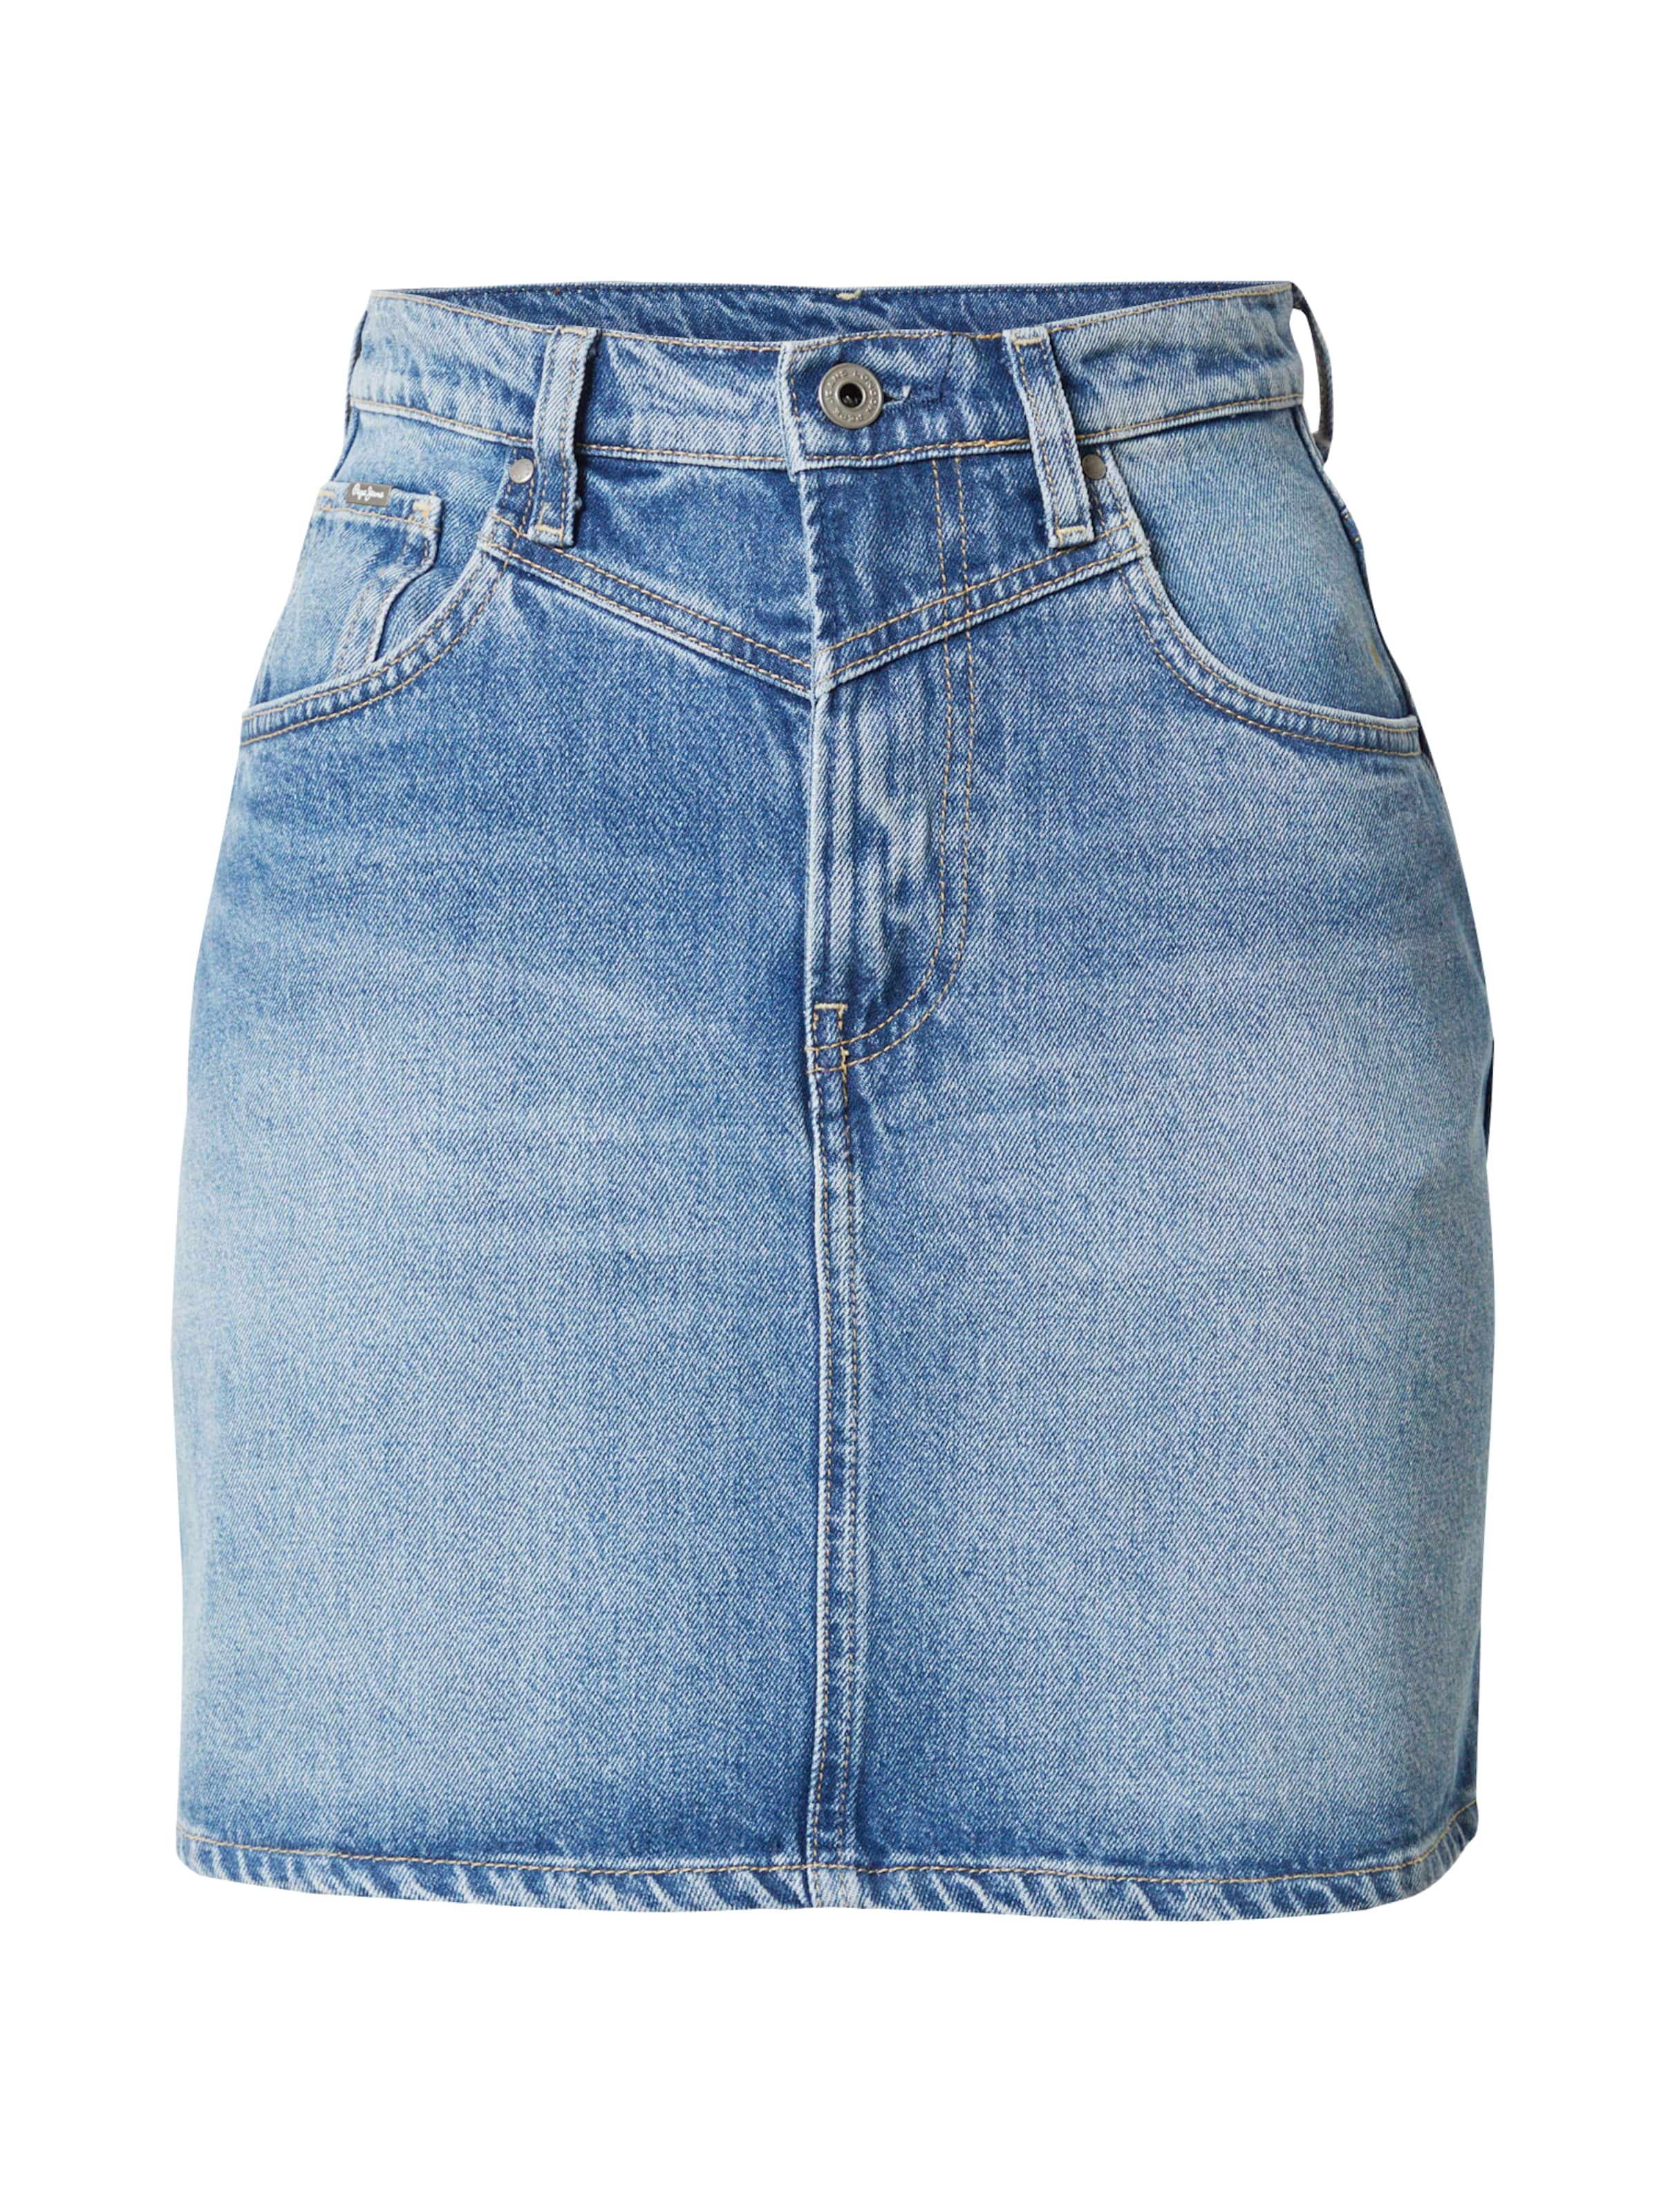 Pepe Jeans Girls Skirts - Buy Pepe Jeans Girls Skirts online in India